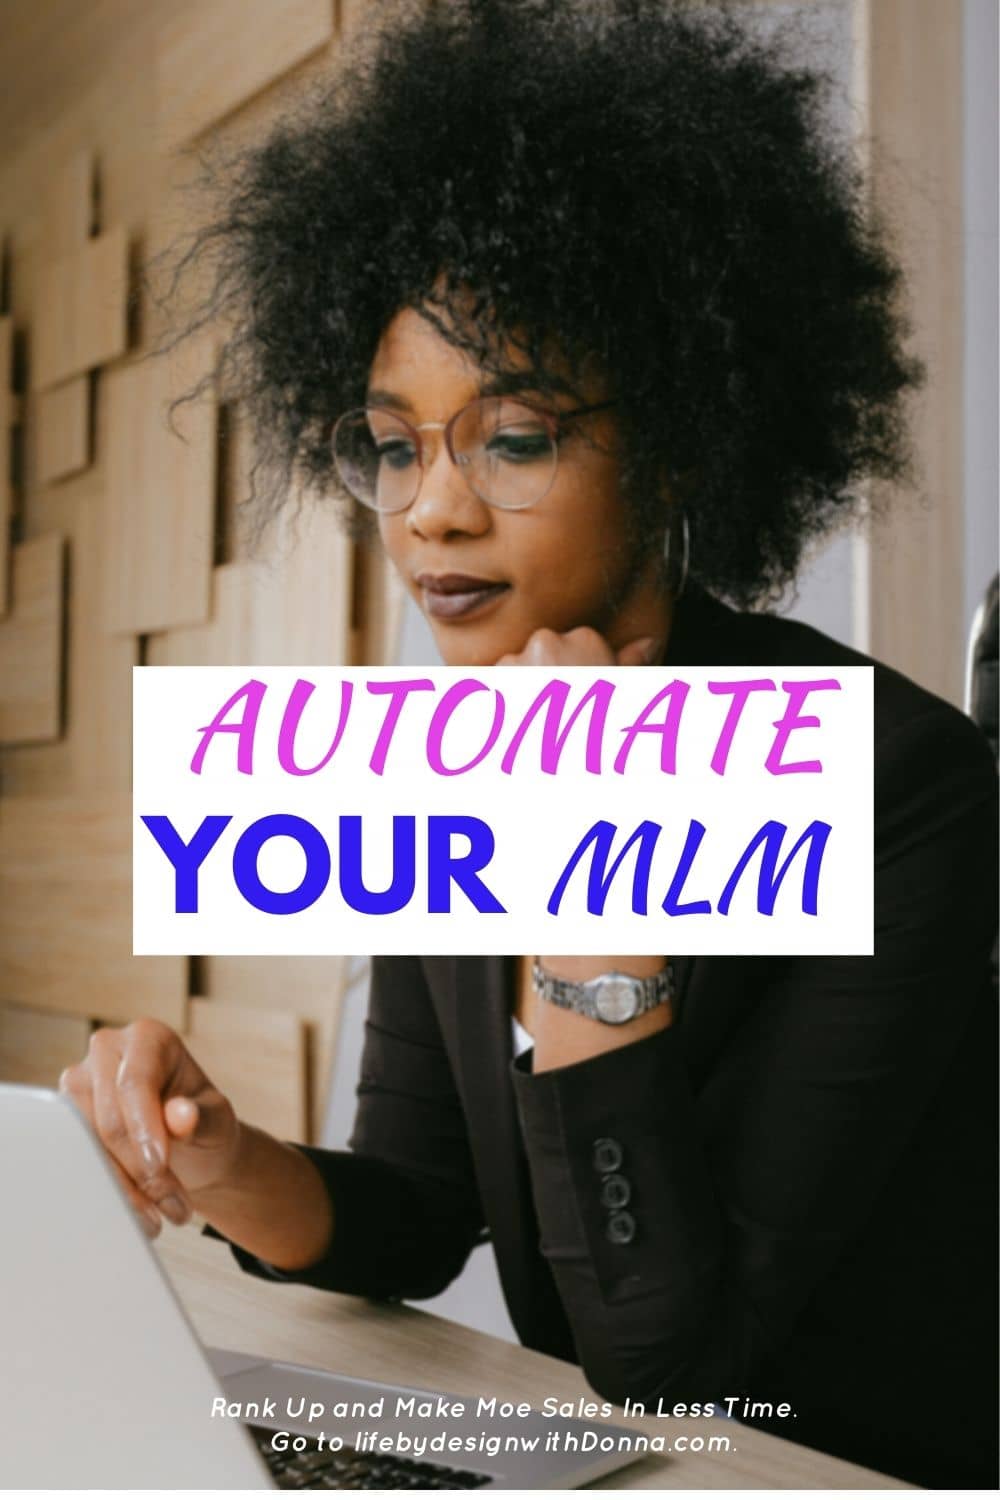 How To Automate Your Home Business, Quickly Get More Sales and Teammates While Reclaiming Your Time.